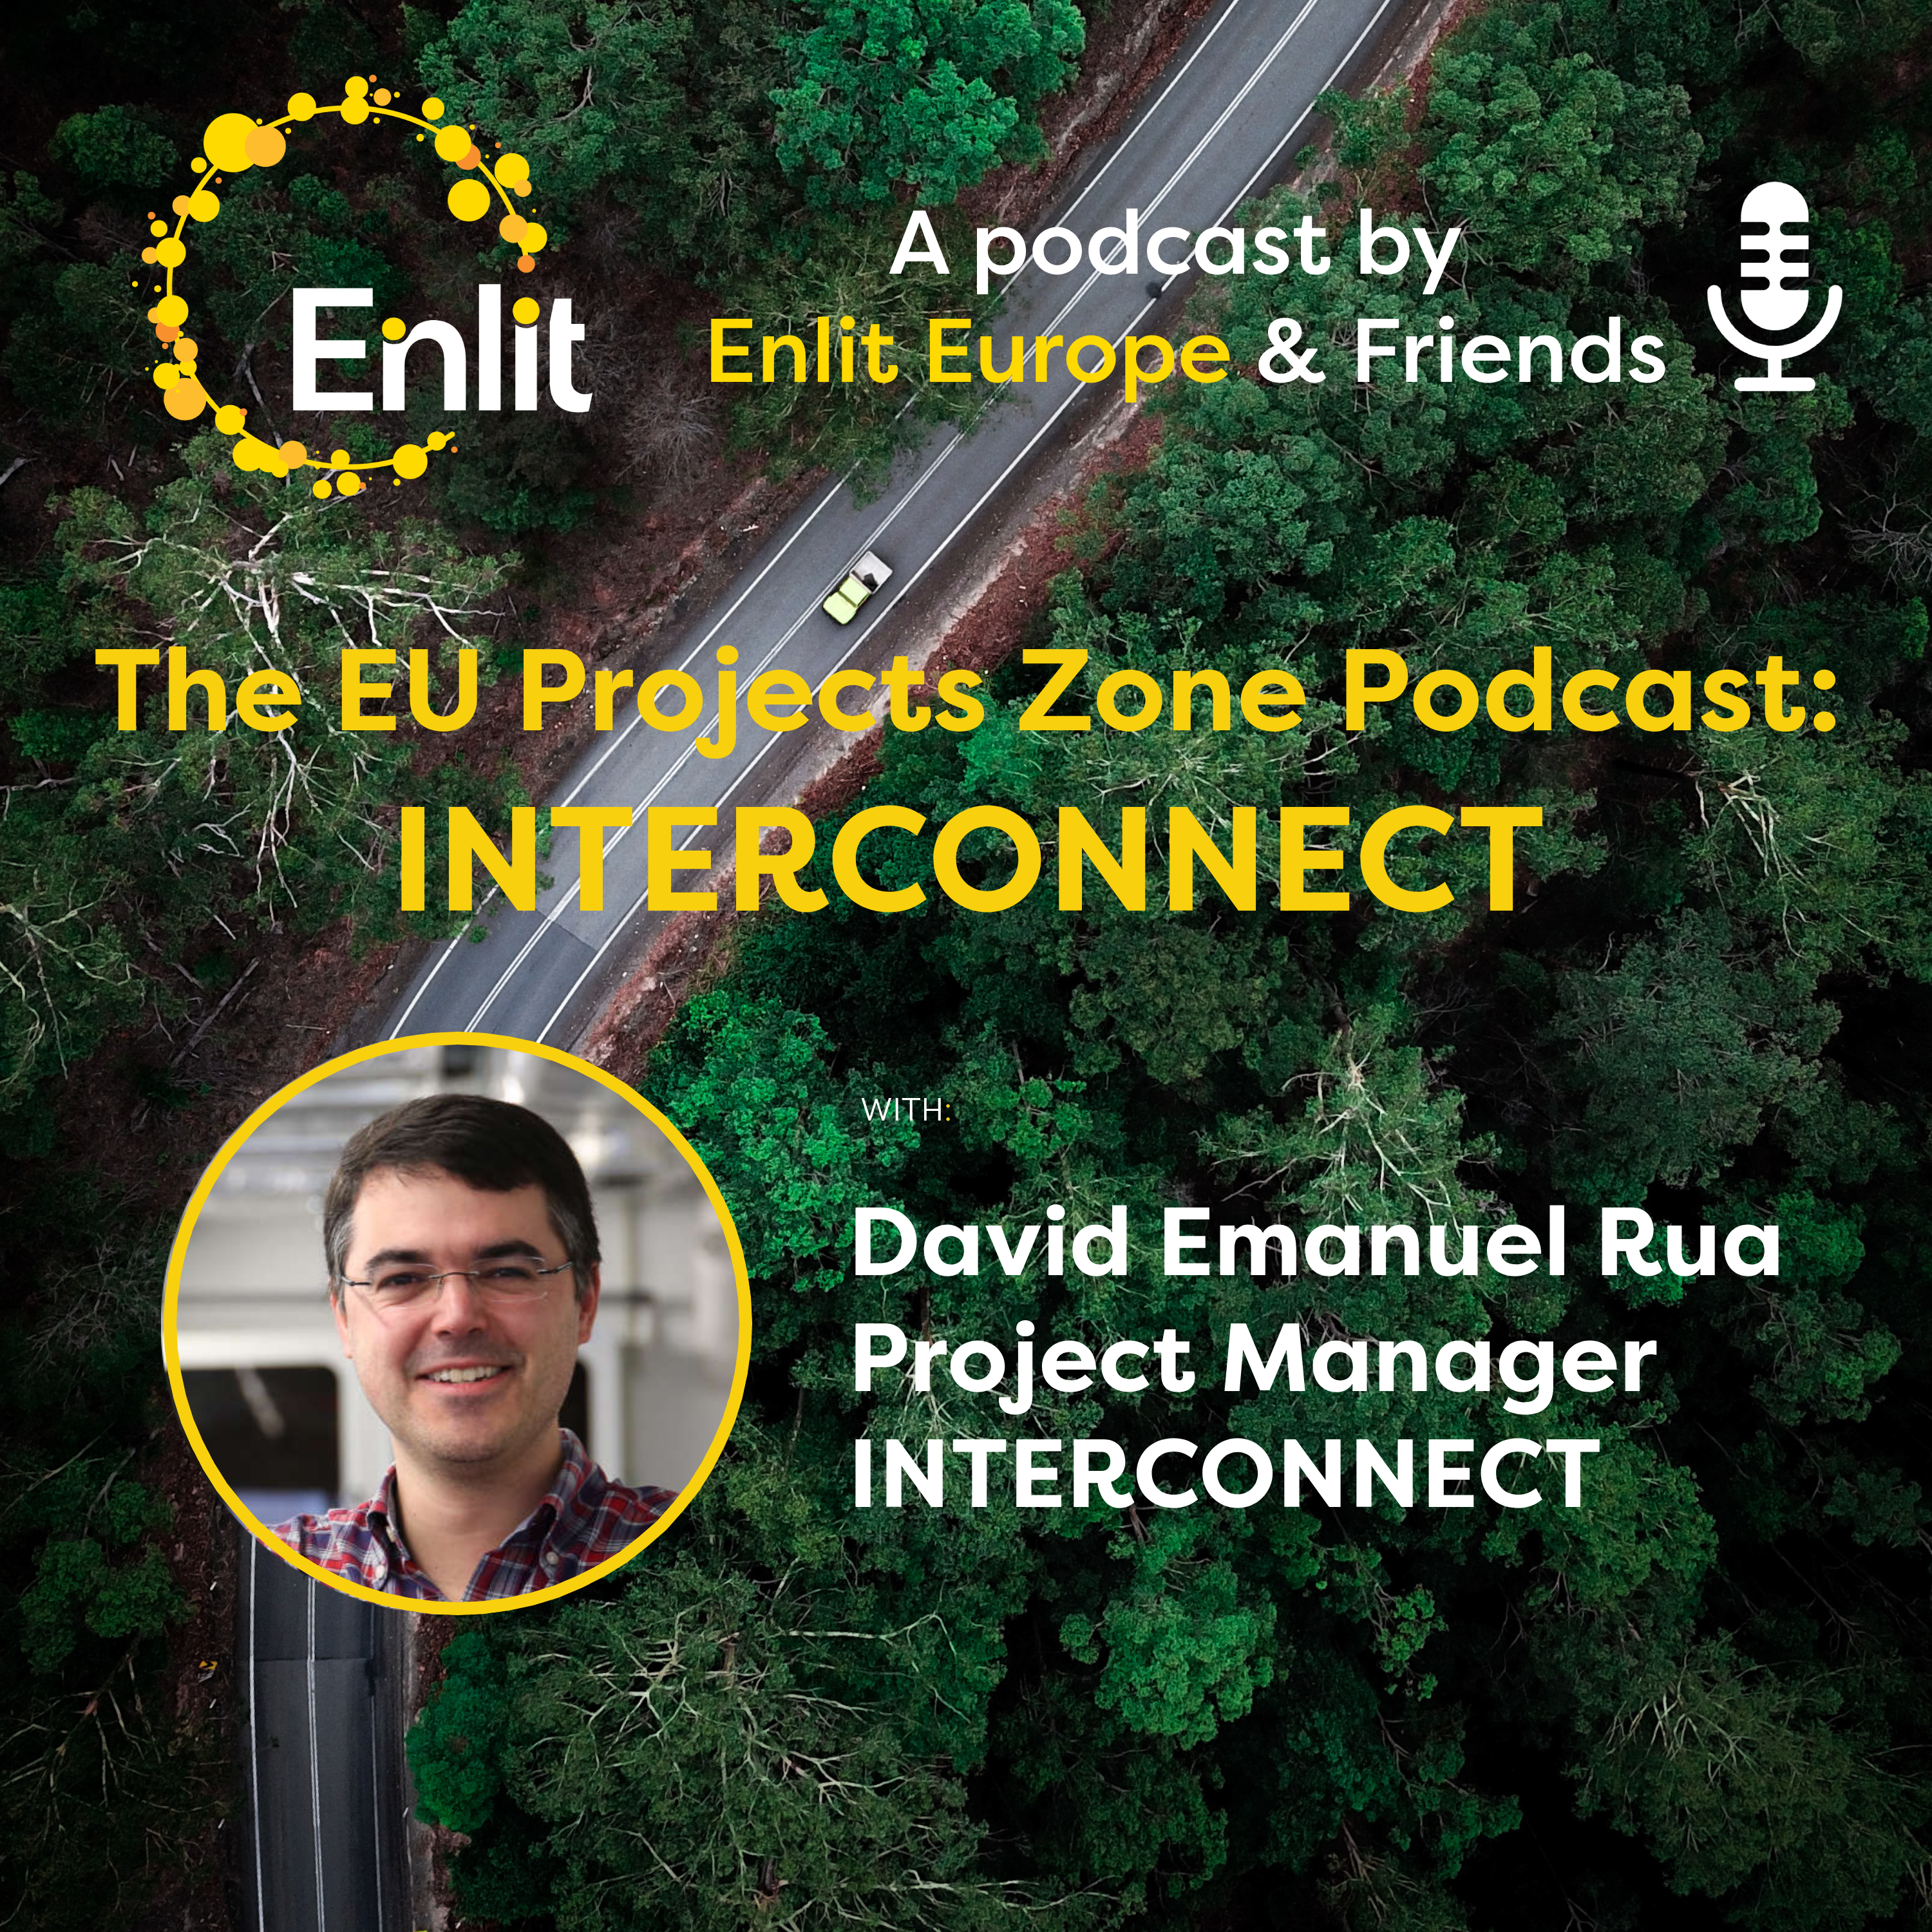 The EU Projects Zone Podcast: INTERCONNECT with David Emanuel Rua